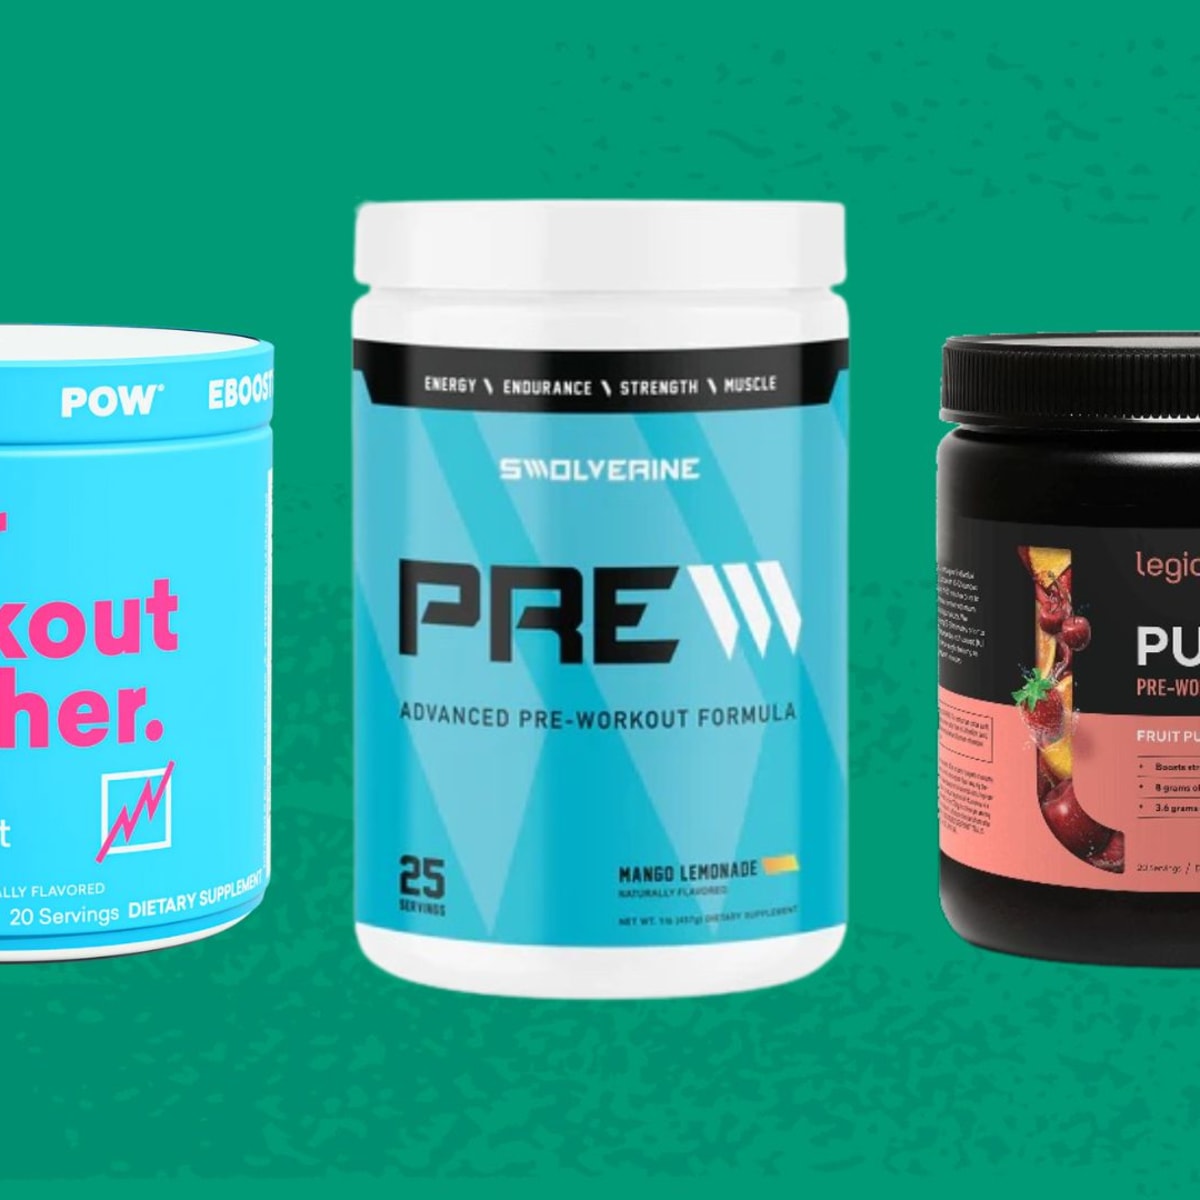 Best Pre-Workout Powder Supplements 2022: Top-Rated Brands, Reviews